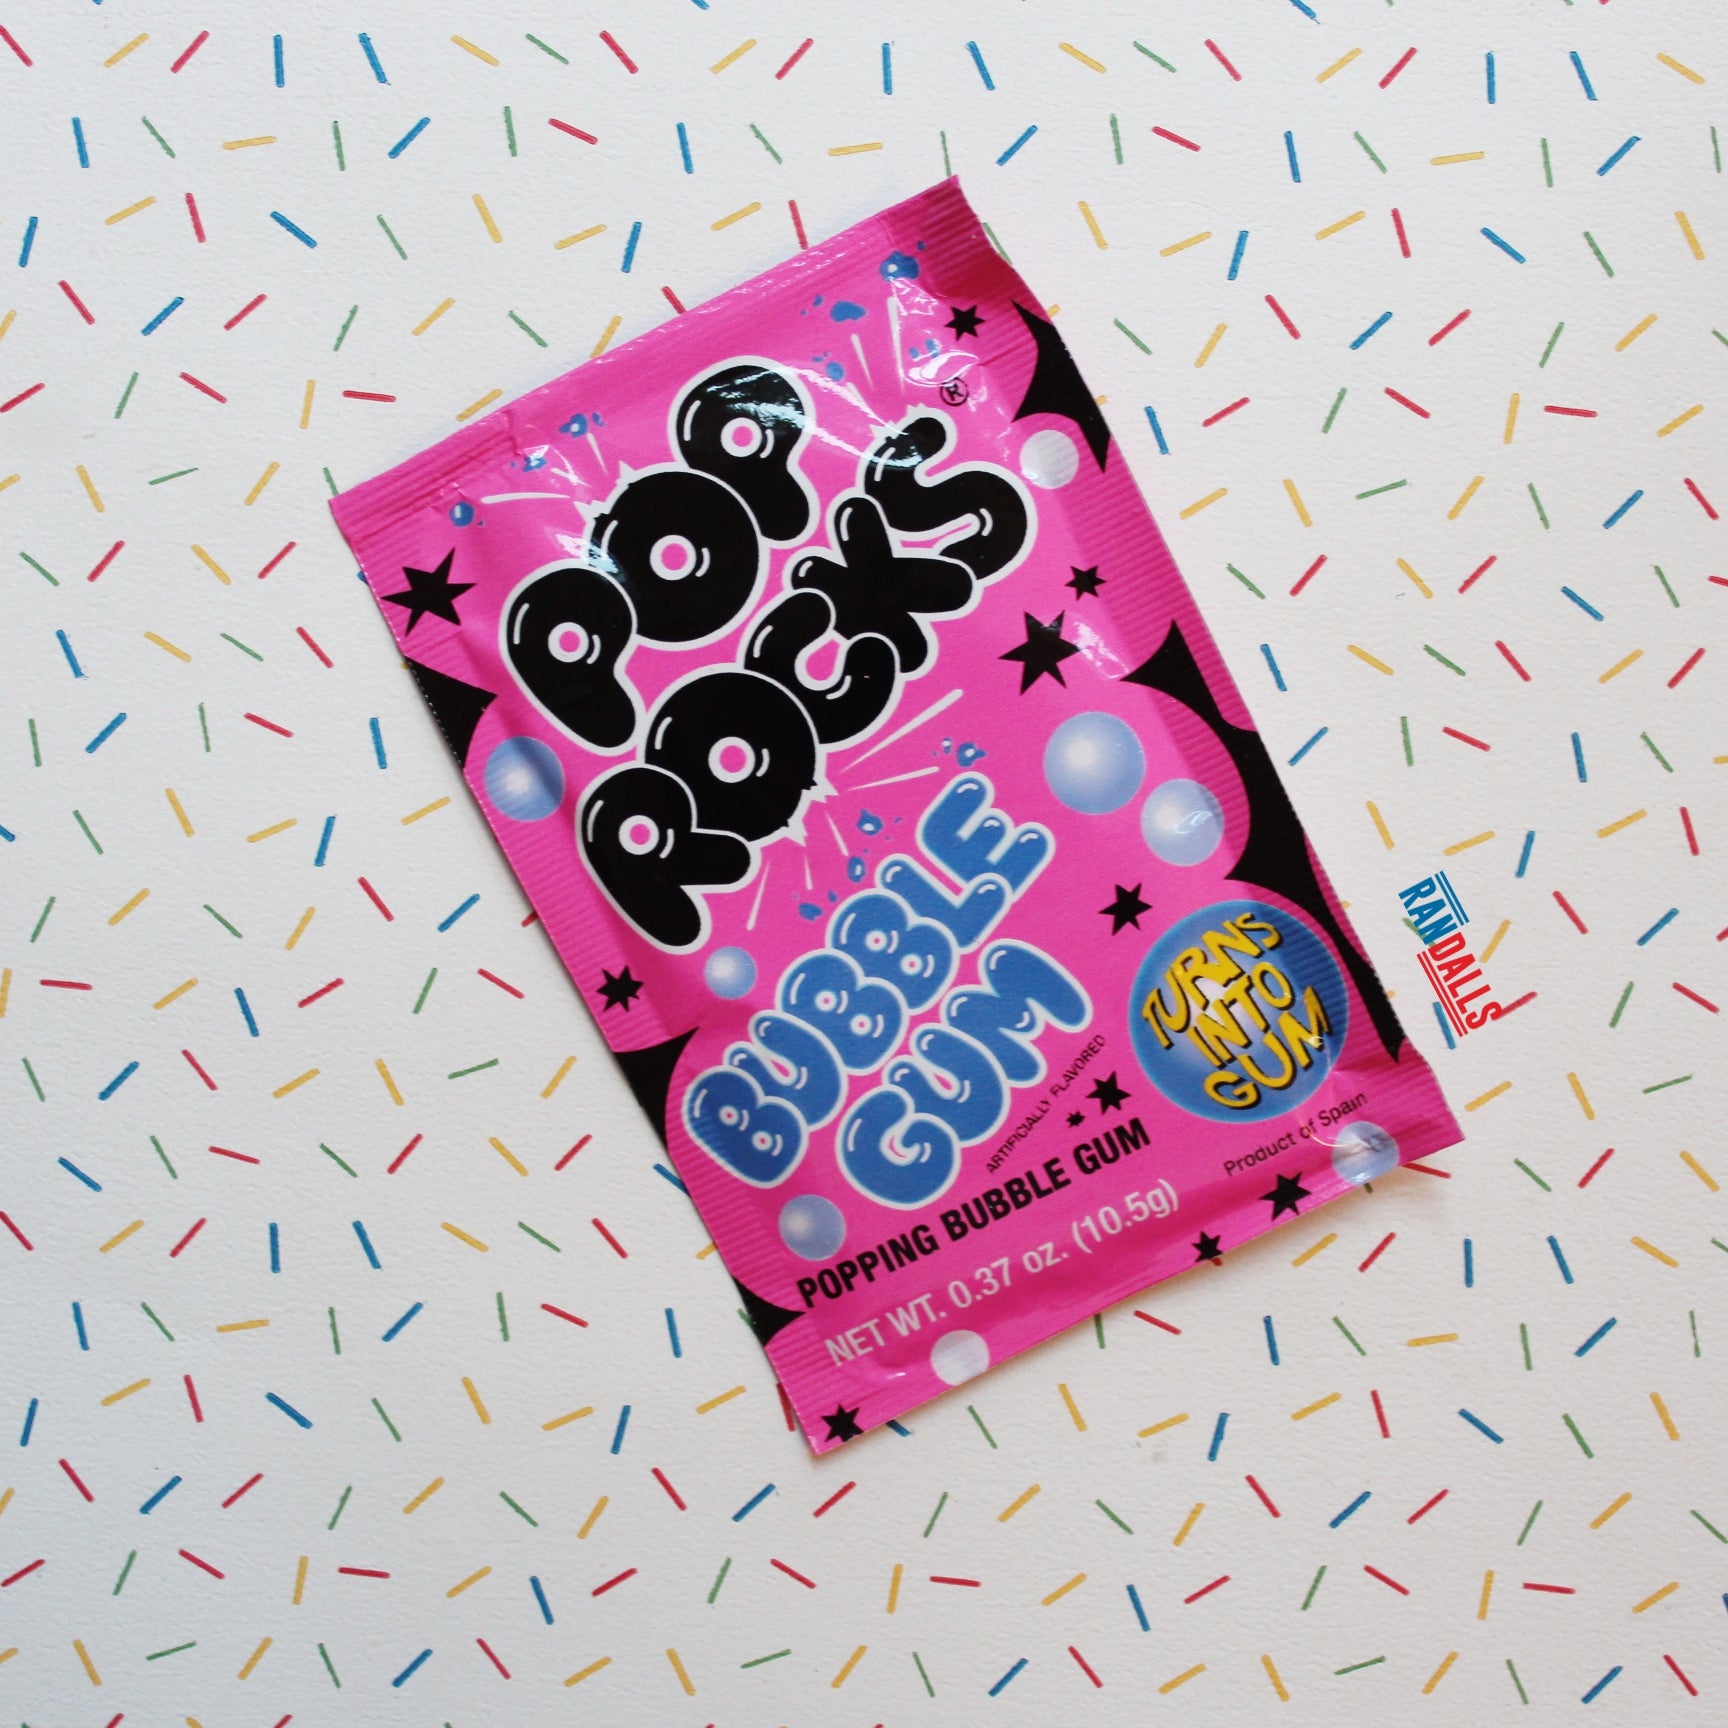 pop rocks bubble gum, popping candy, crackling sweets, randalls